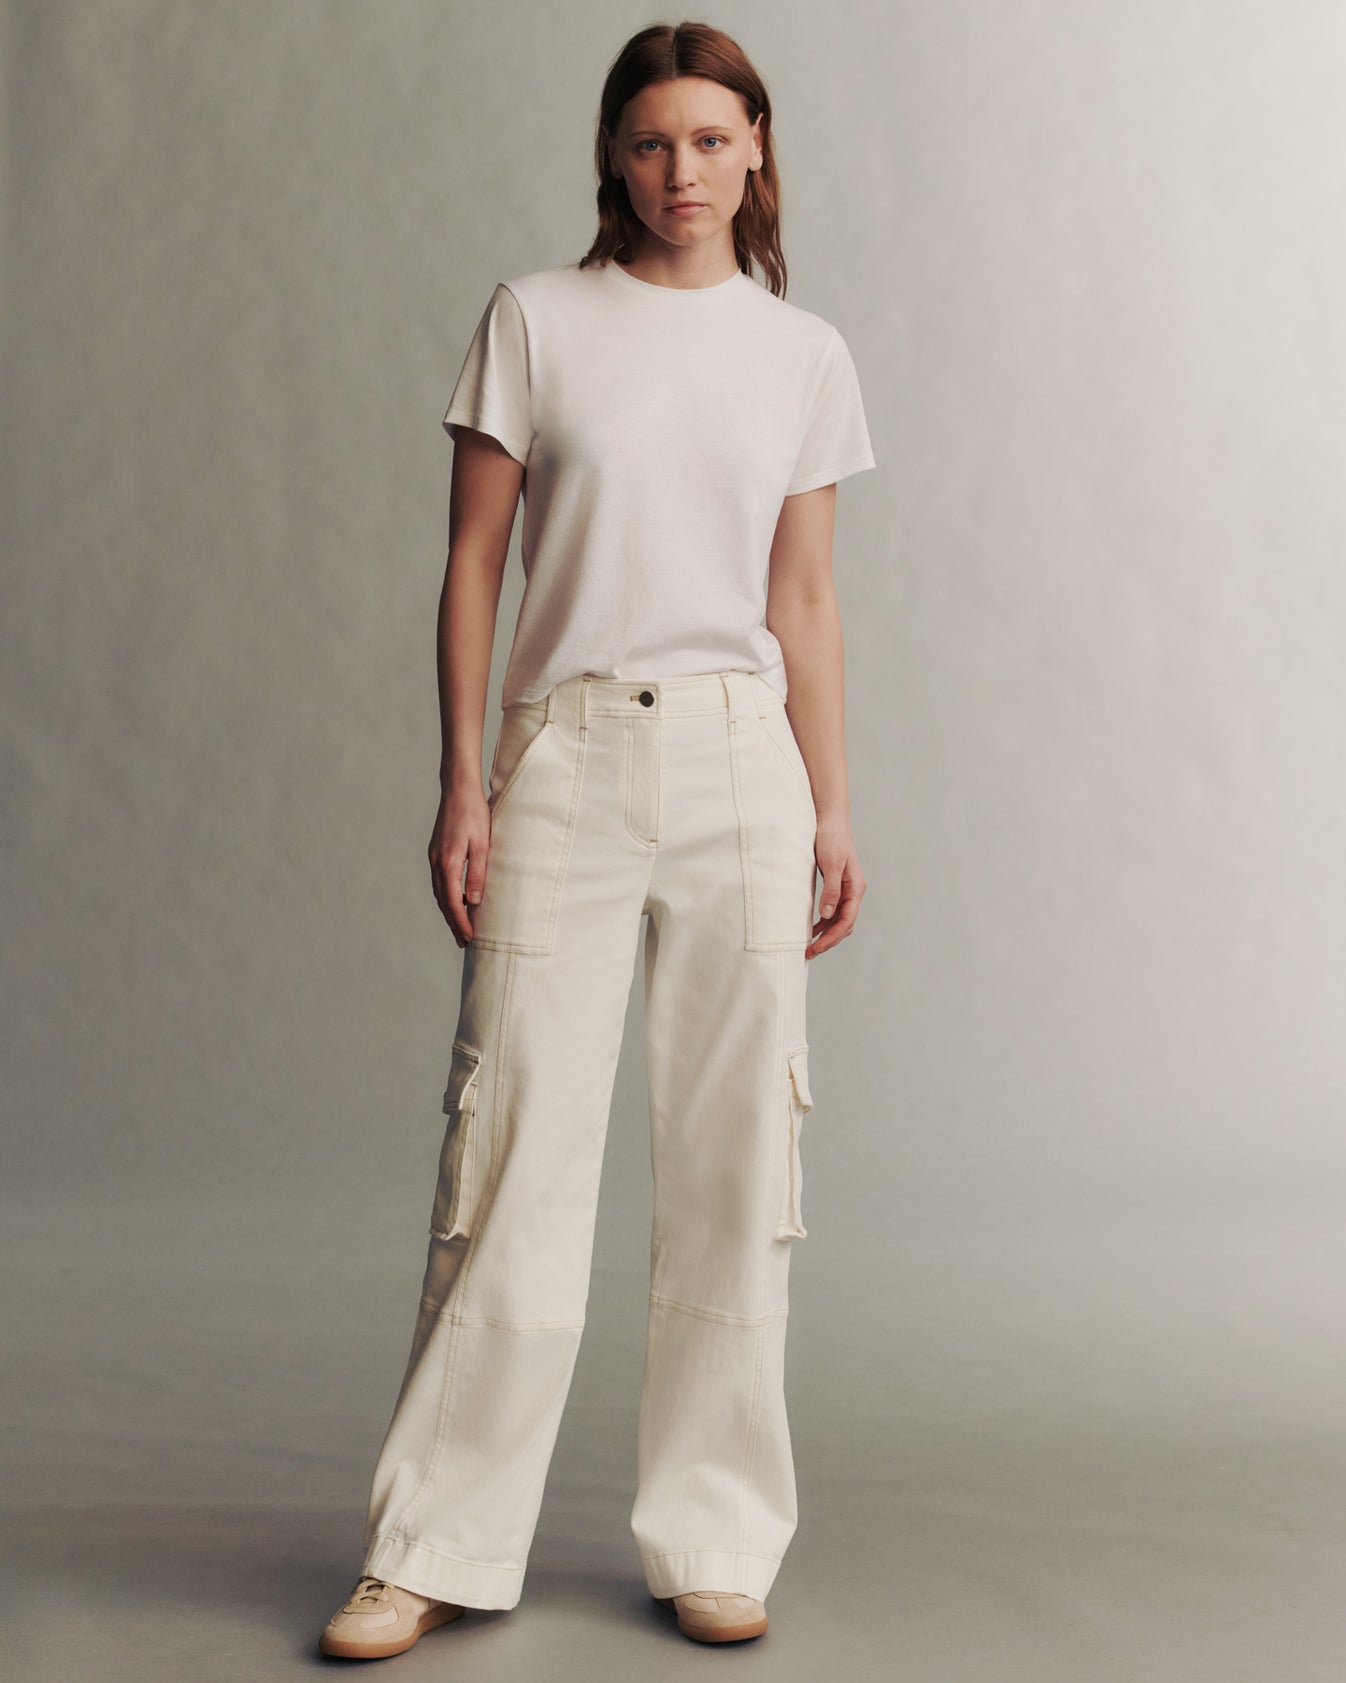 TWP Ivory Coop Pant with Cargo Pockets in Cotton Twill view 5